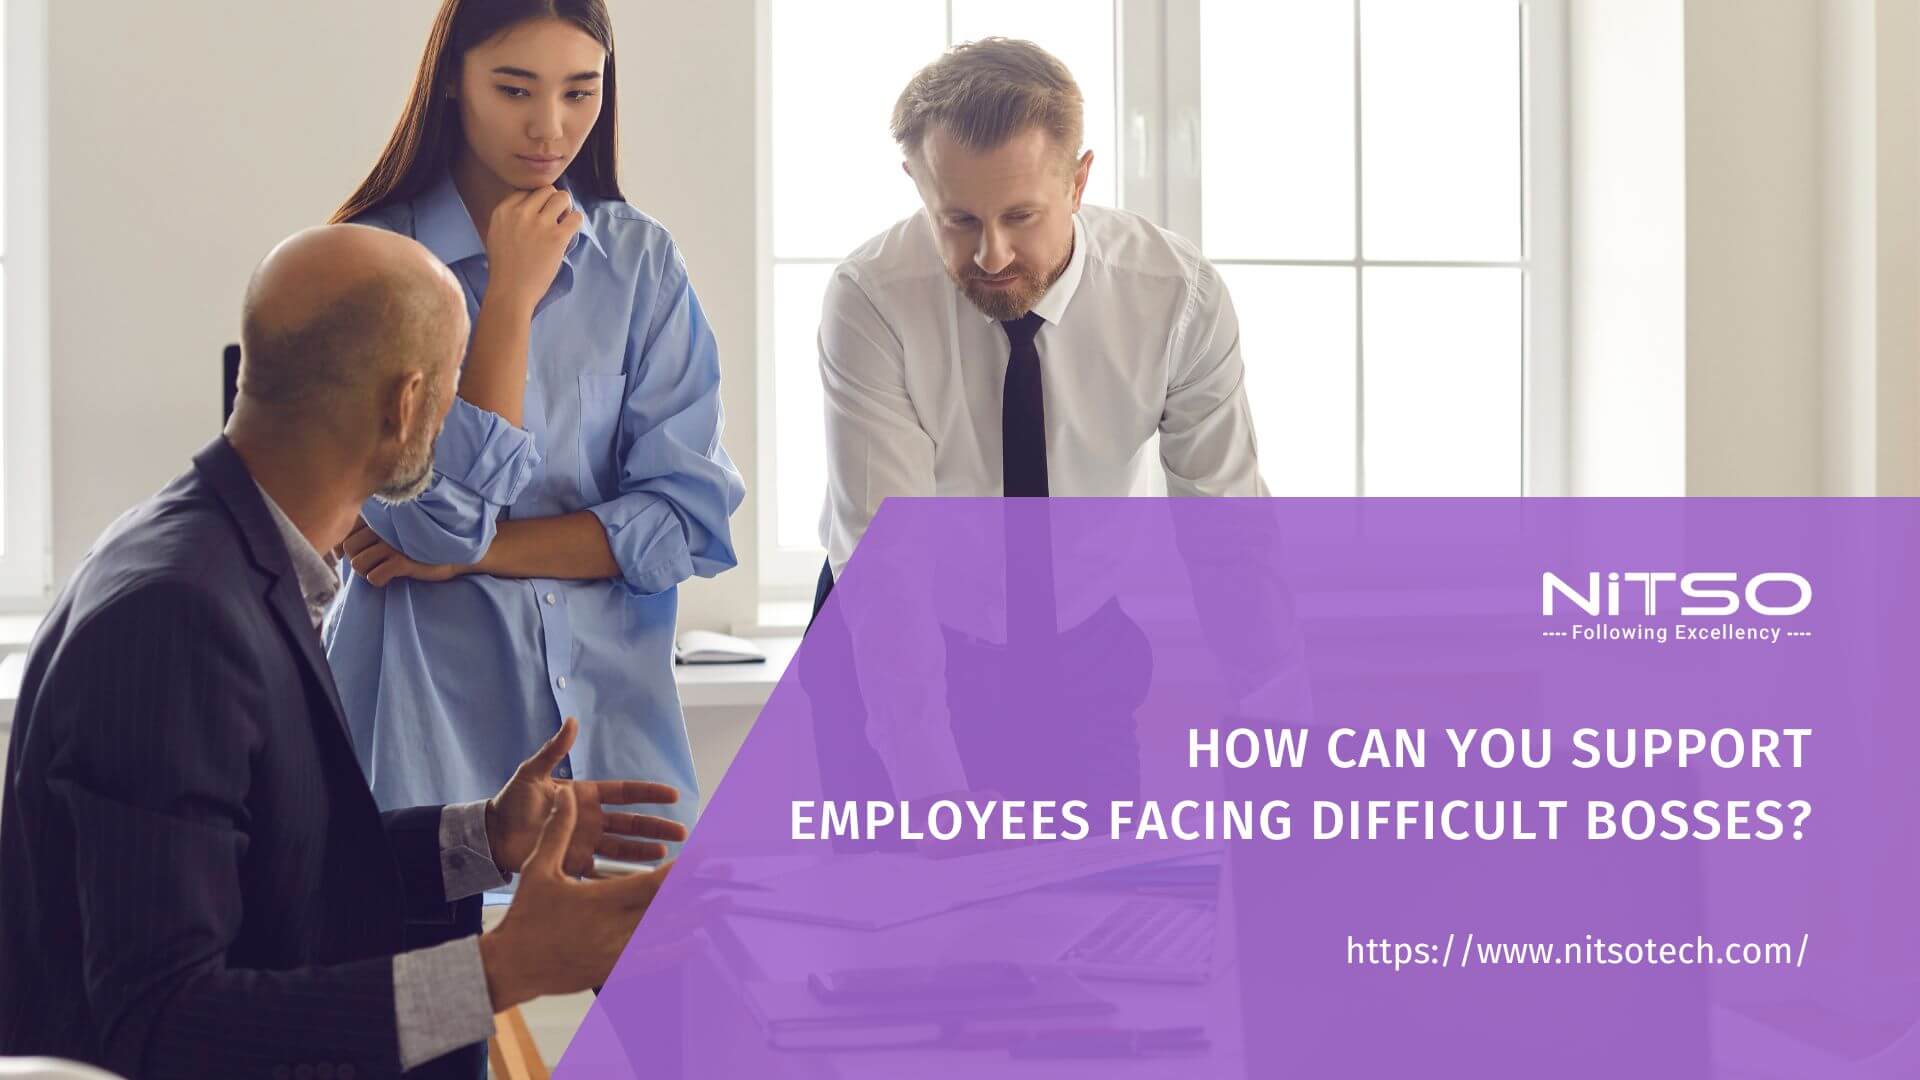 What to Do When Employees Have a Toxic or Difficult Boss?